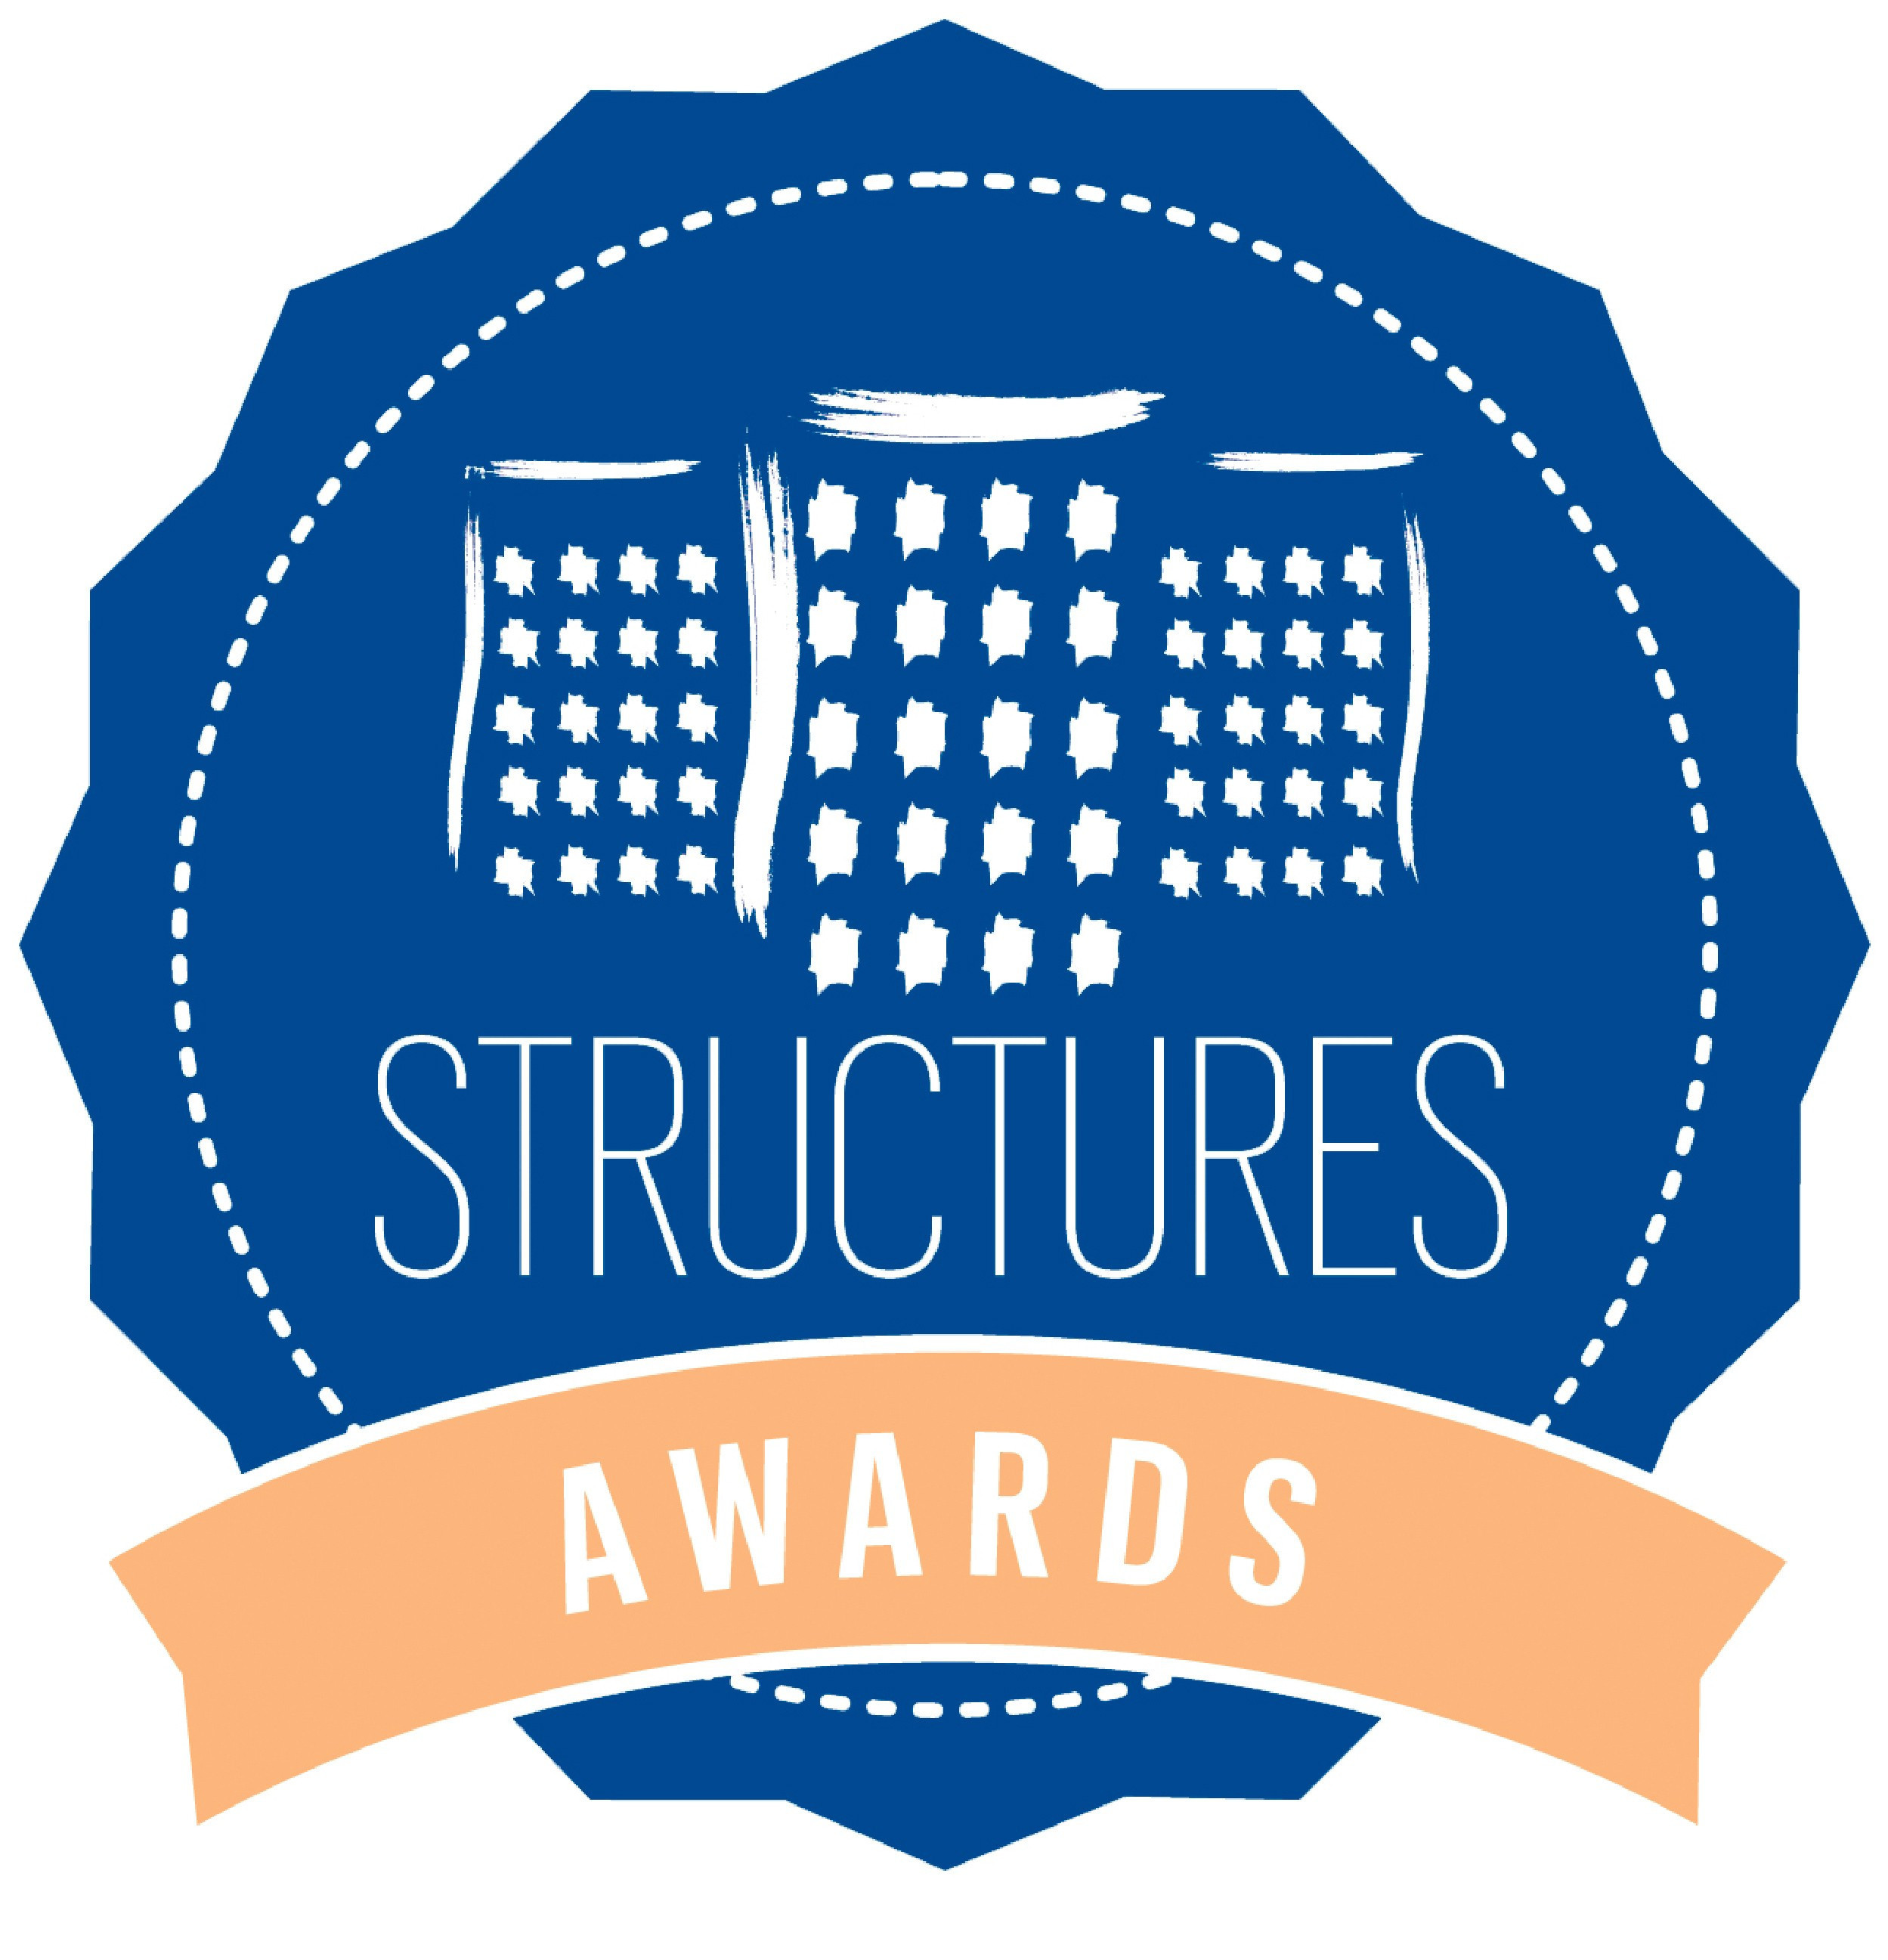 Award: 2014 Silicon Valley Business Journal Structures Awards: Best Reuse/Rehab Project: 435 Indio Way